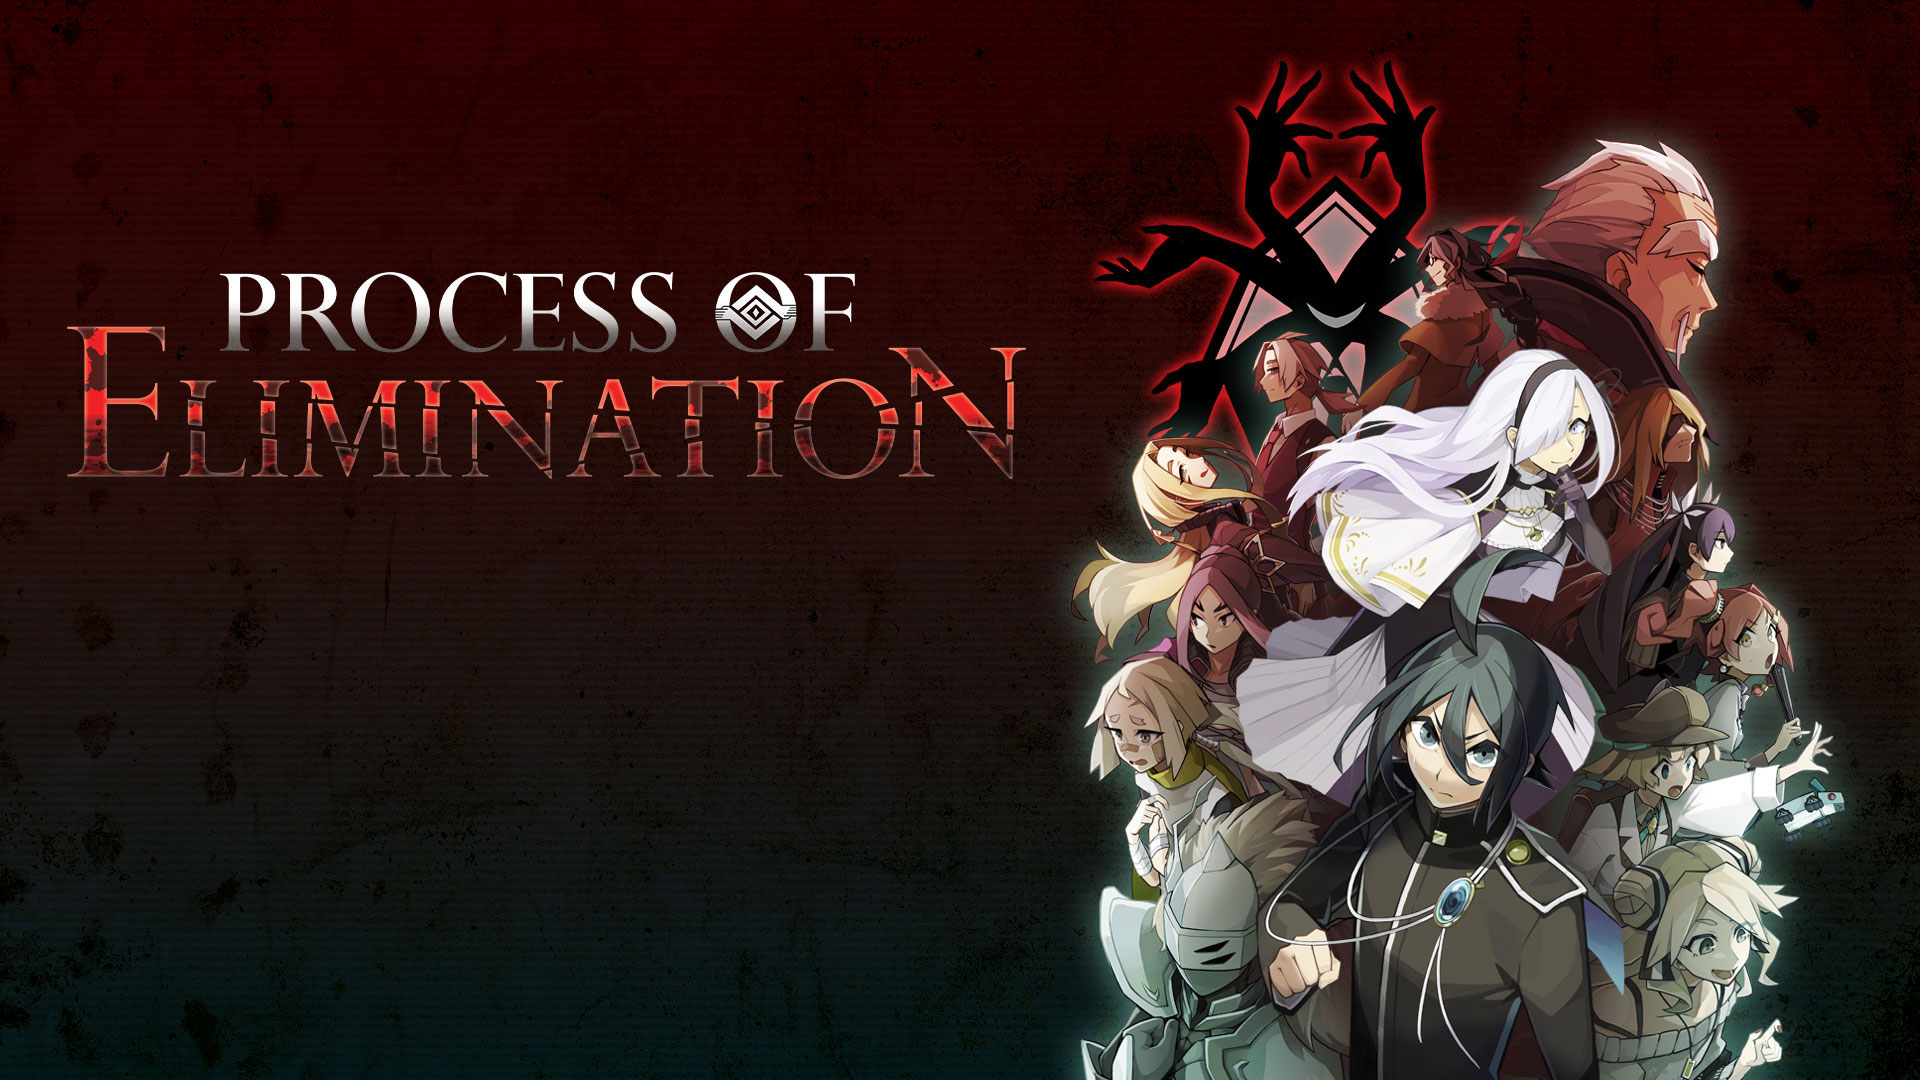 The Process of Elimination key art featuring members of the Detective Alliance